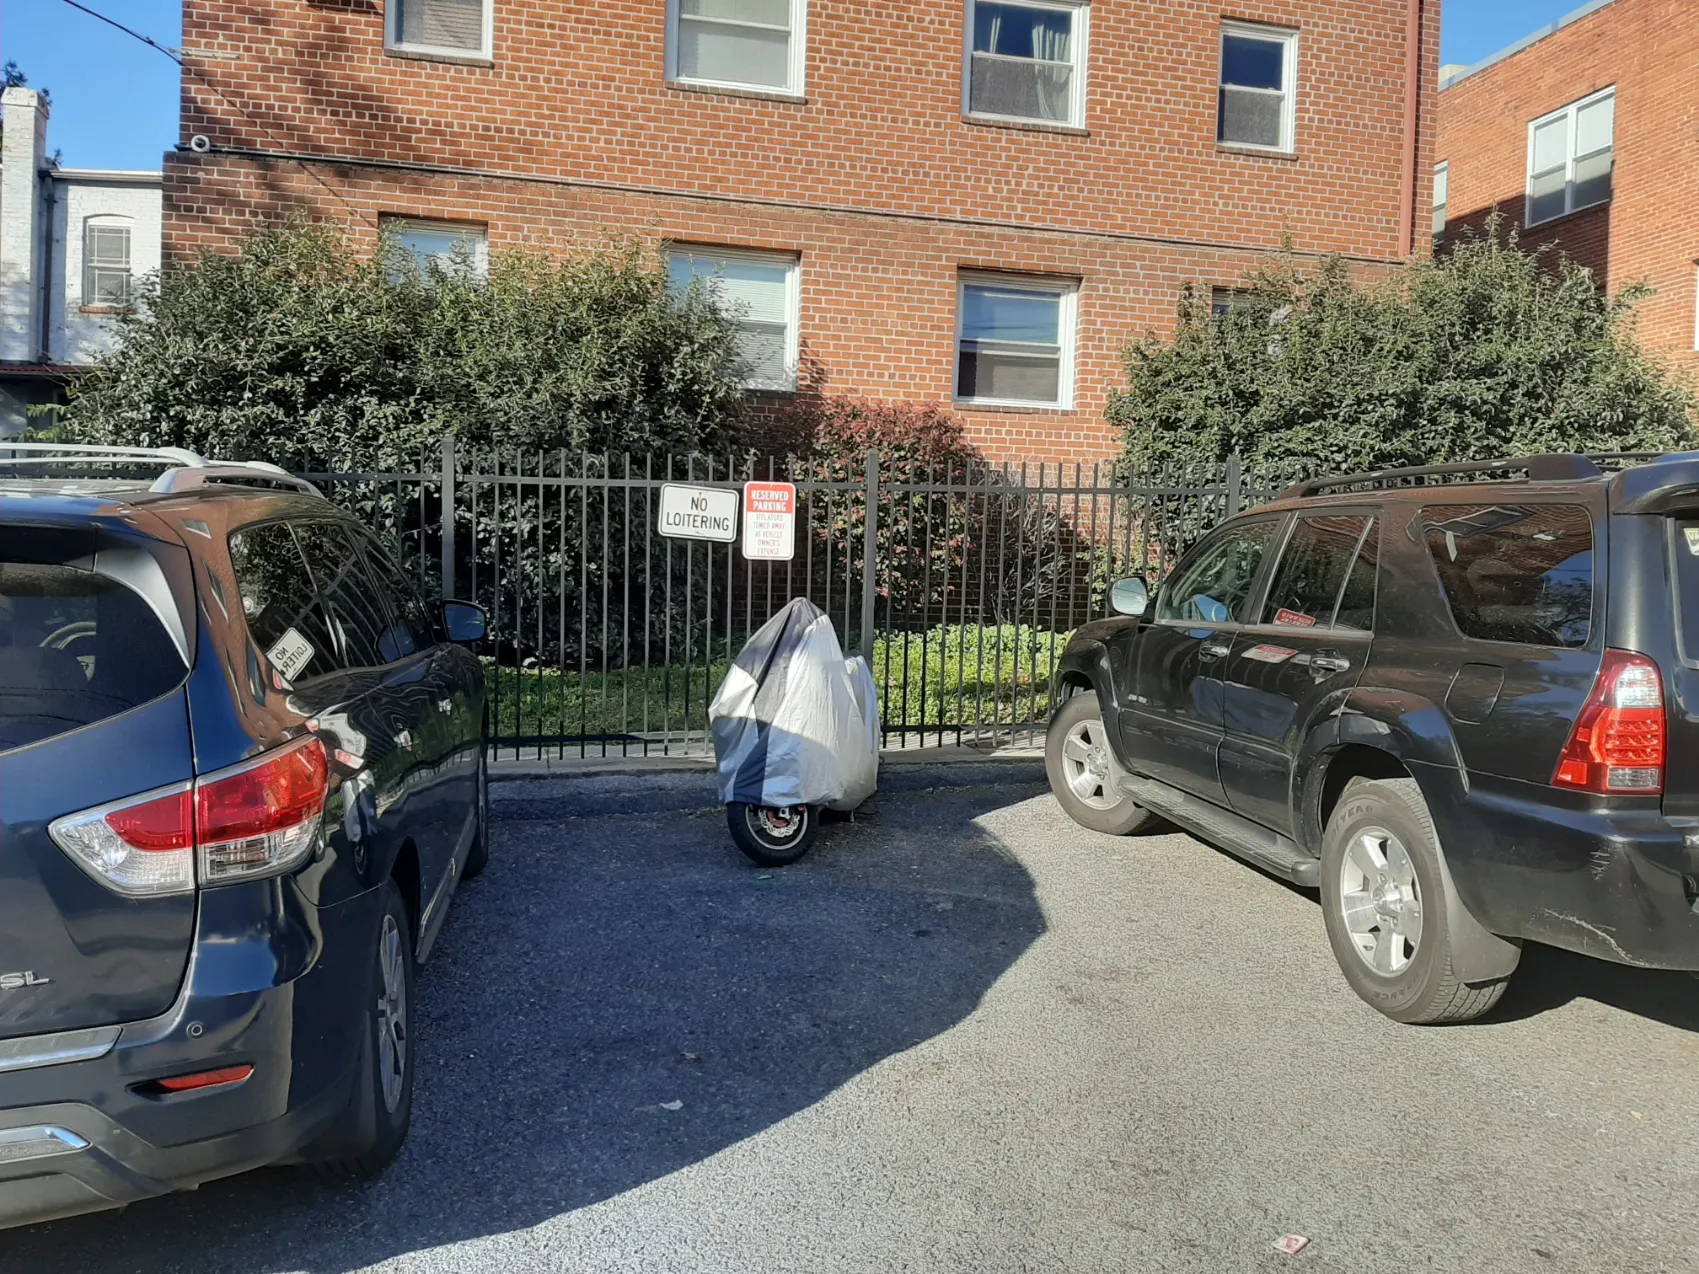 Parking, Garages And Car Spaces For Rent - Private Space - 526 Kenyon St Nw - Rear